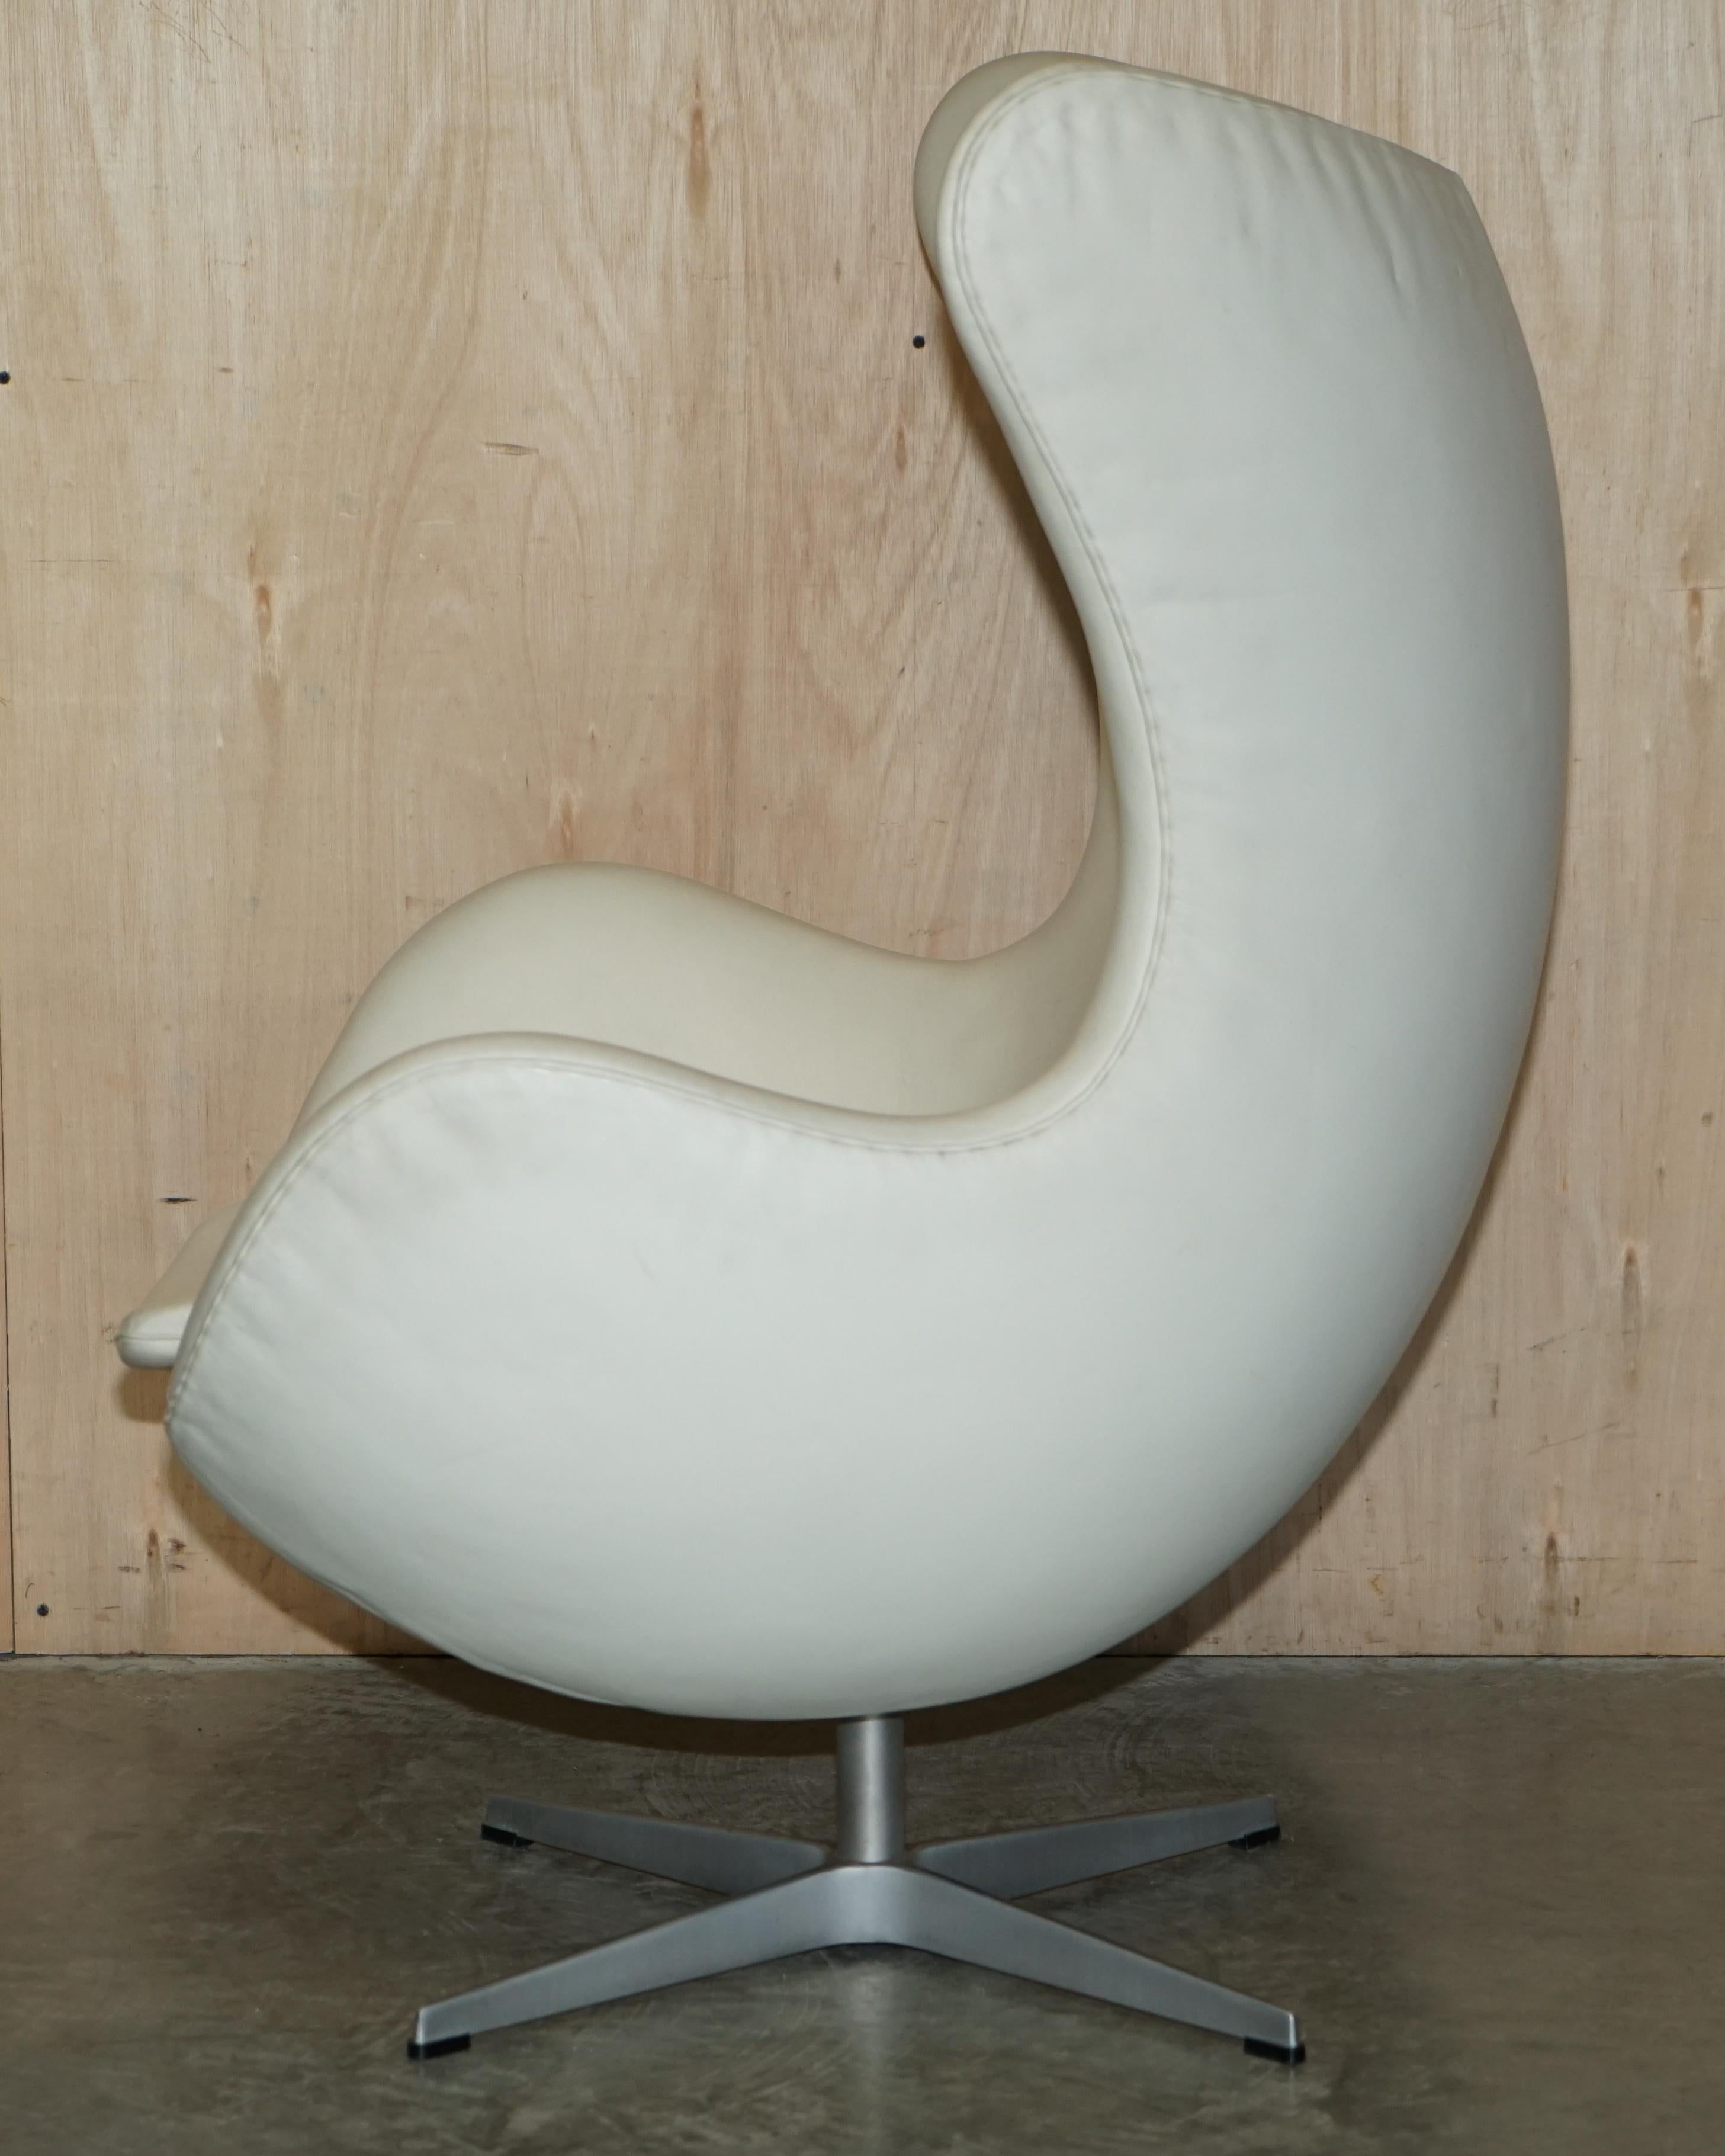 Stamped Fritz Hansen Cream Leather Egg Chair & Ottoman Footstool For Sale 6